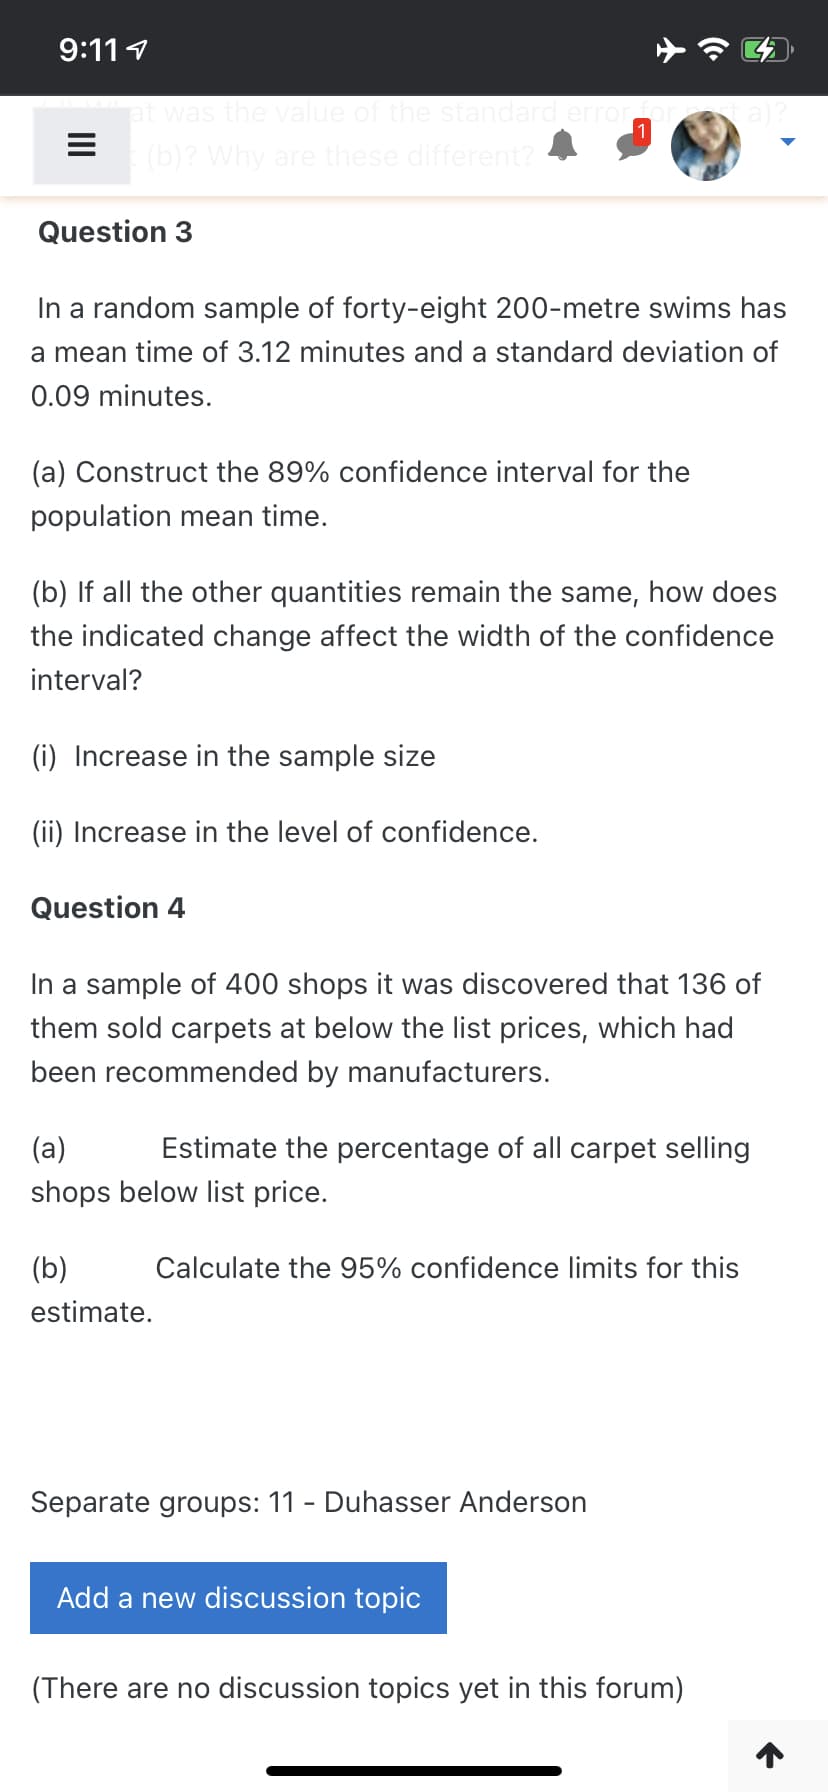 9:111
at was the value of the standard error
ea)?
1
(b)? Why are these different?
Question 3
In a random sample of forty-eight 200-metre swims has
a mean time of 3.12 minutes and a standard deviation of
0.09 minutes.
(a) Construct the 89% confidence interval for the
population mean time.
(b) If all the other quantities remain the same, how does
the indicated change affect the width of the confidence
interval?
(i) Increase in the sample size
(ii) Increase in the level of confidence.
Question 4
In a sample of 400 shops it was discovered that 136 of
them sold carpets at below the list prices, which had
been recommended by manufacturers.
(a)
Estimate the percentage of all carpet selling
shops below list price.
(b)
Calculate the 95% confidence limits for this
estimate.
Separate groups: 11 - Duhasser Anderson
Add a new discussion topic
(There are no discussion topics yet in this forum)
